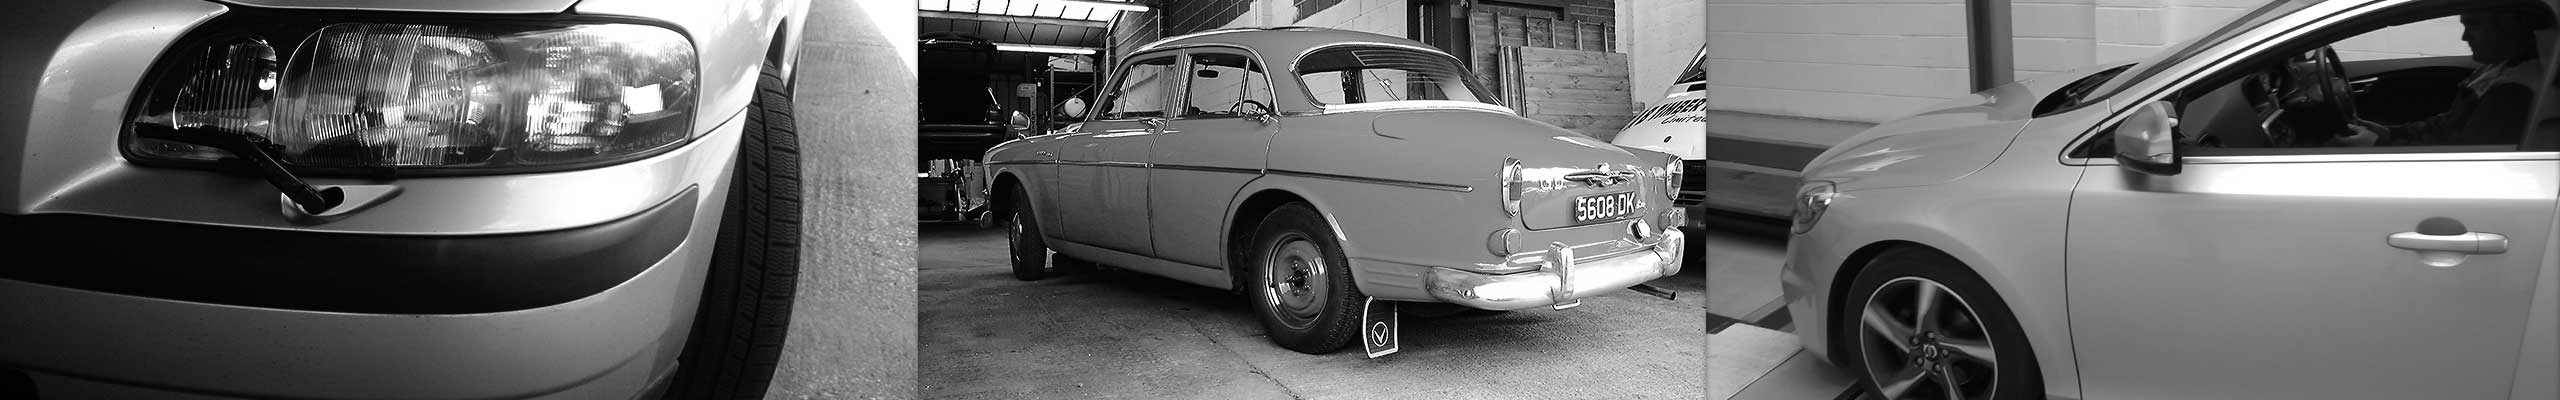 lovely black and white wide montage of very old to new volvos entering excels garage